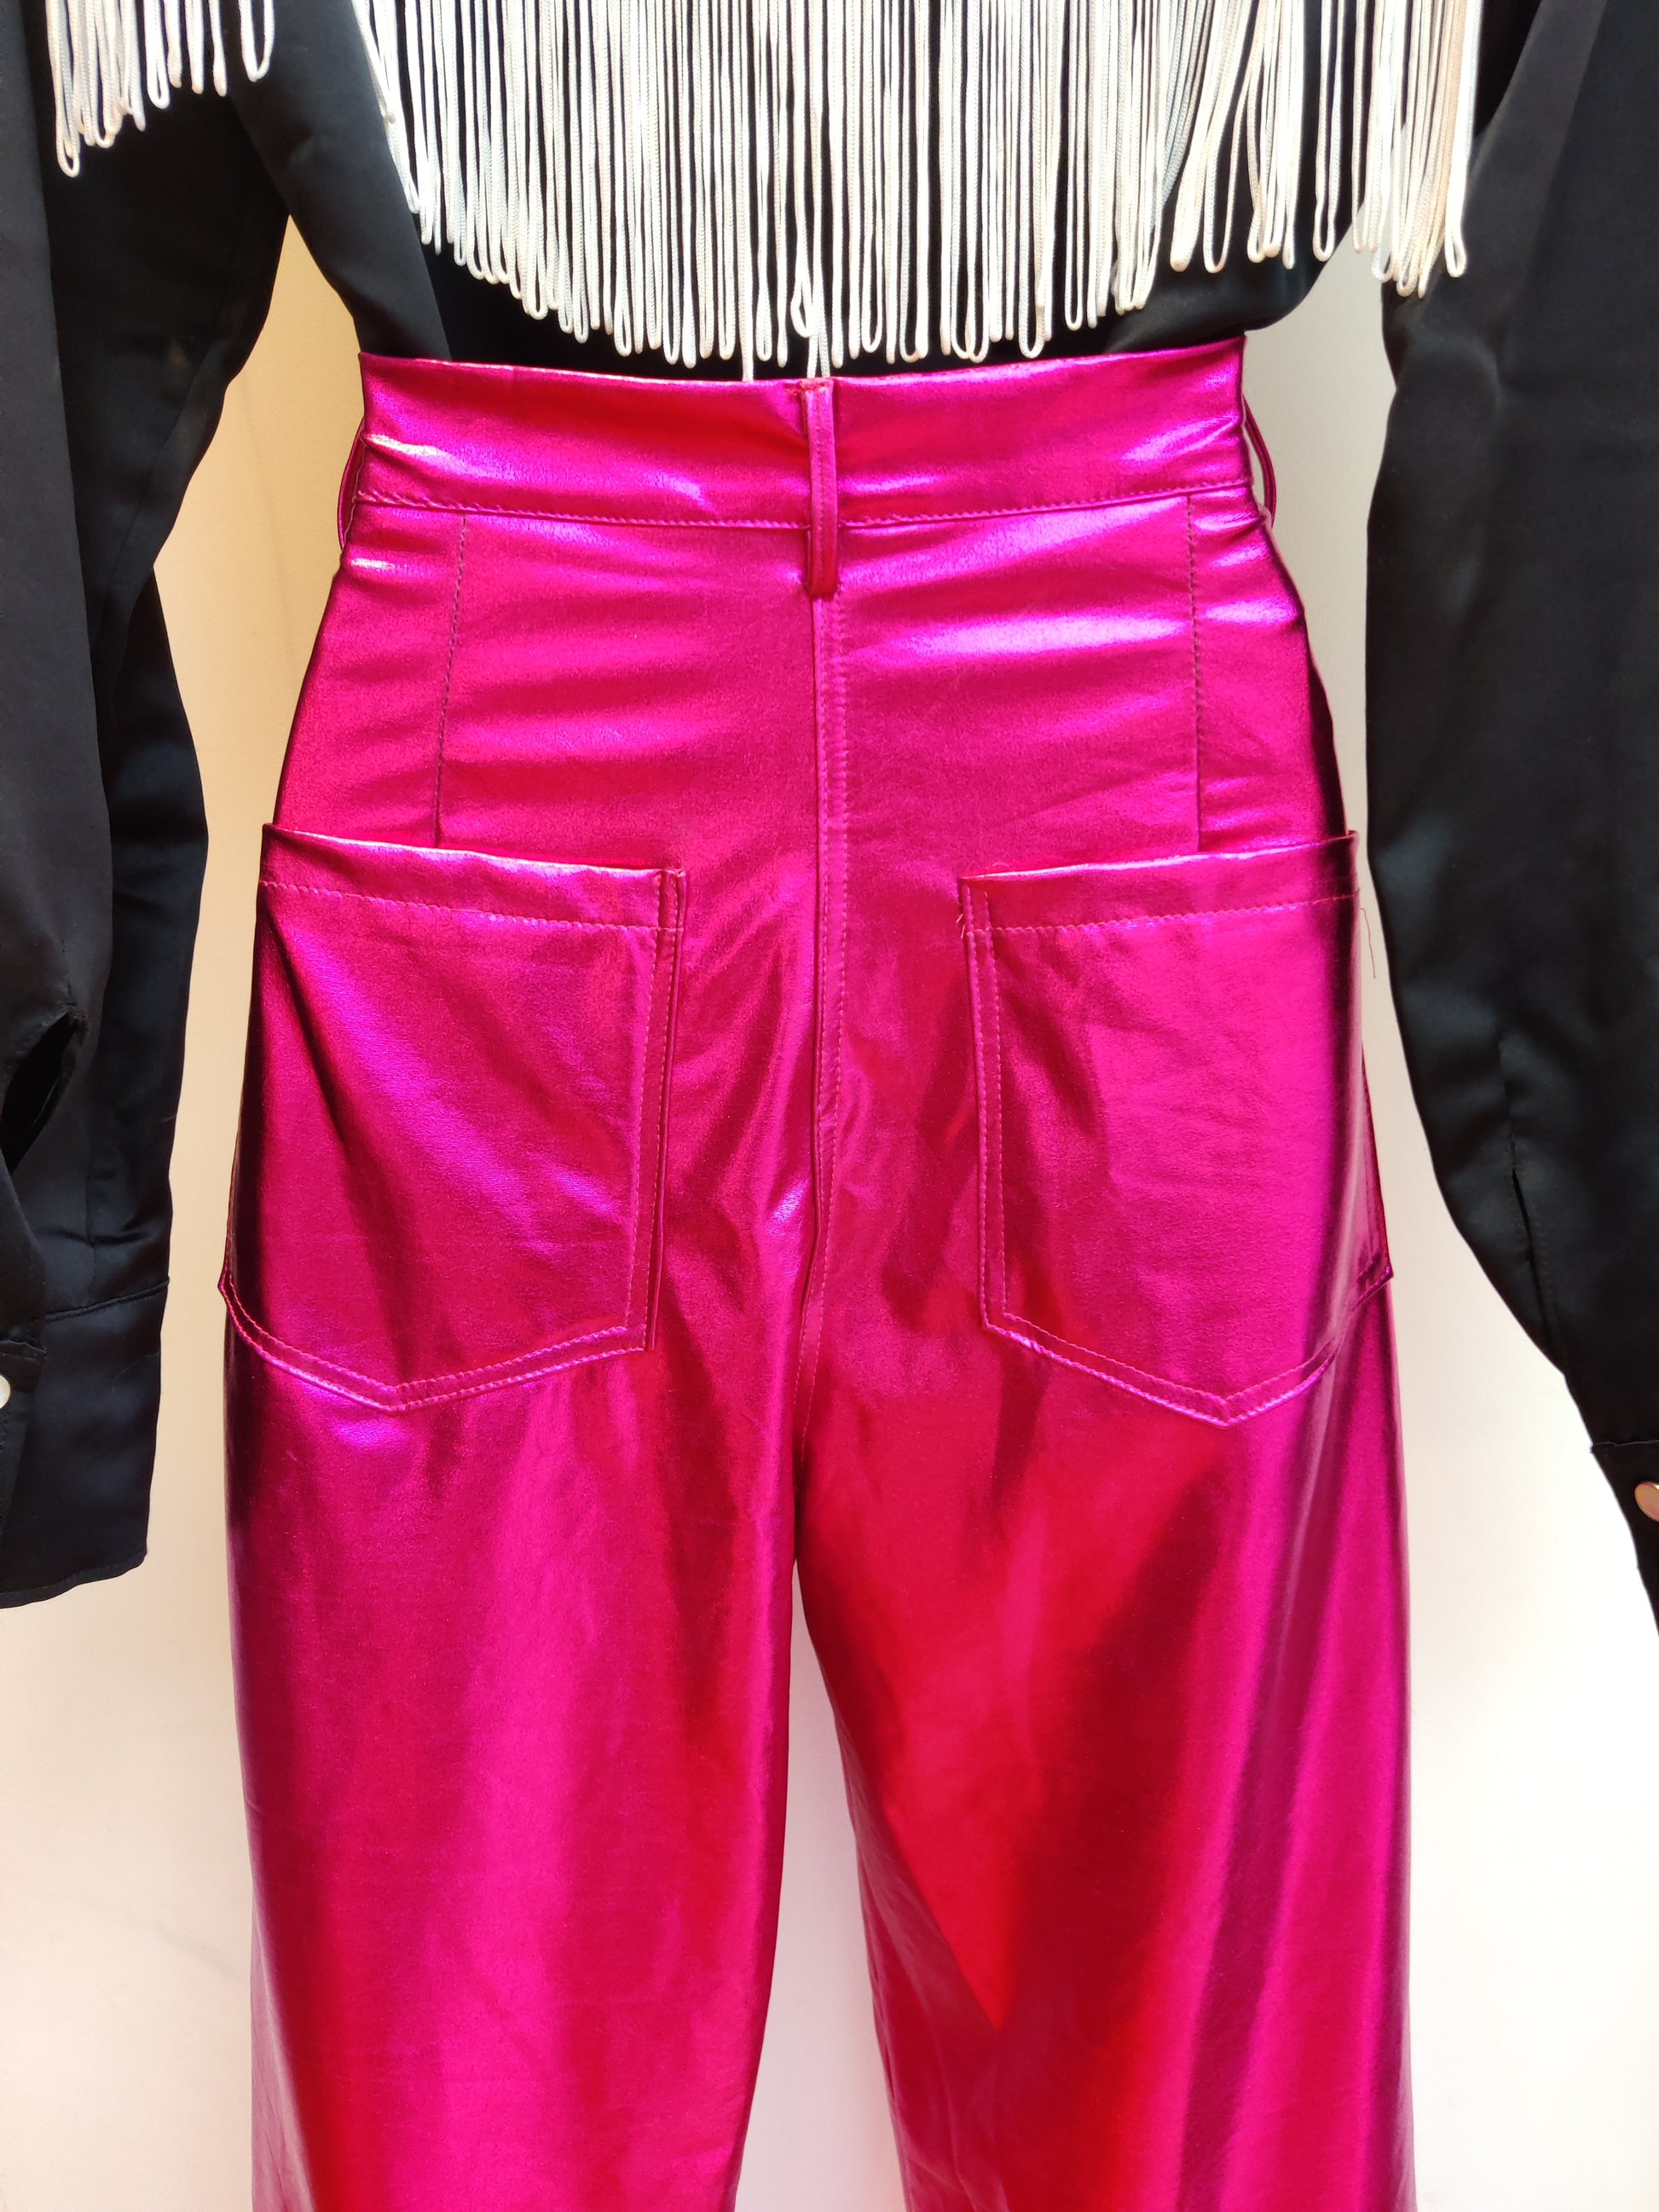 Stretchy pink vintage trousers